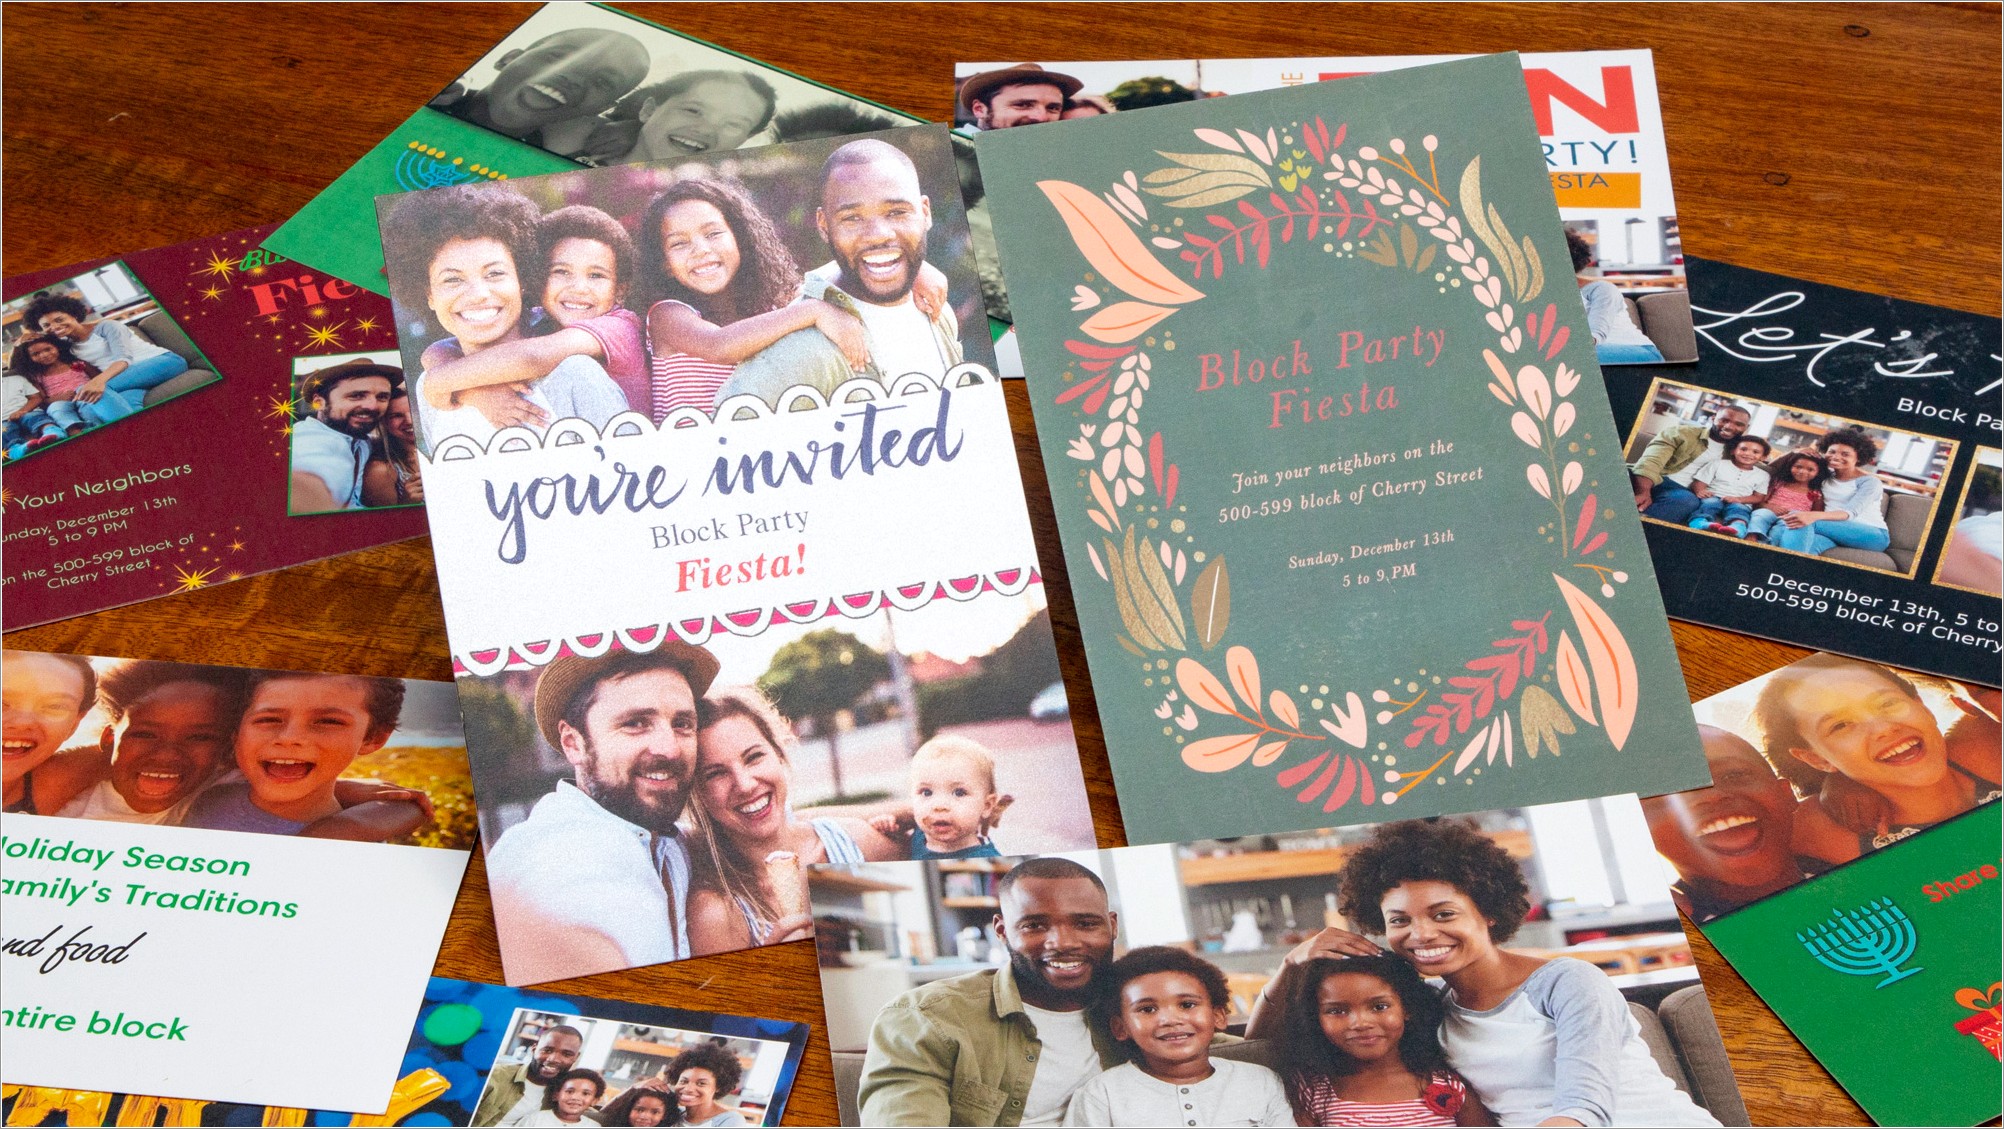 Does Walmart Print Double Sided Invitations